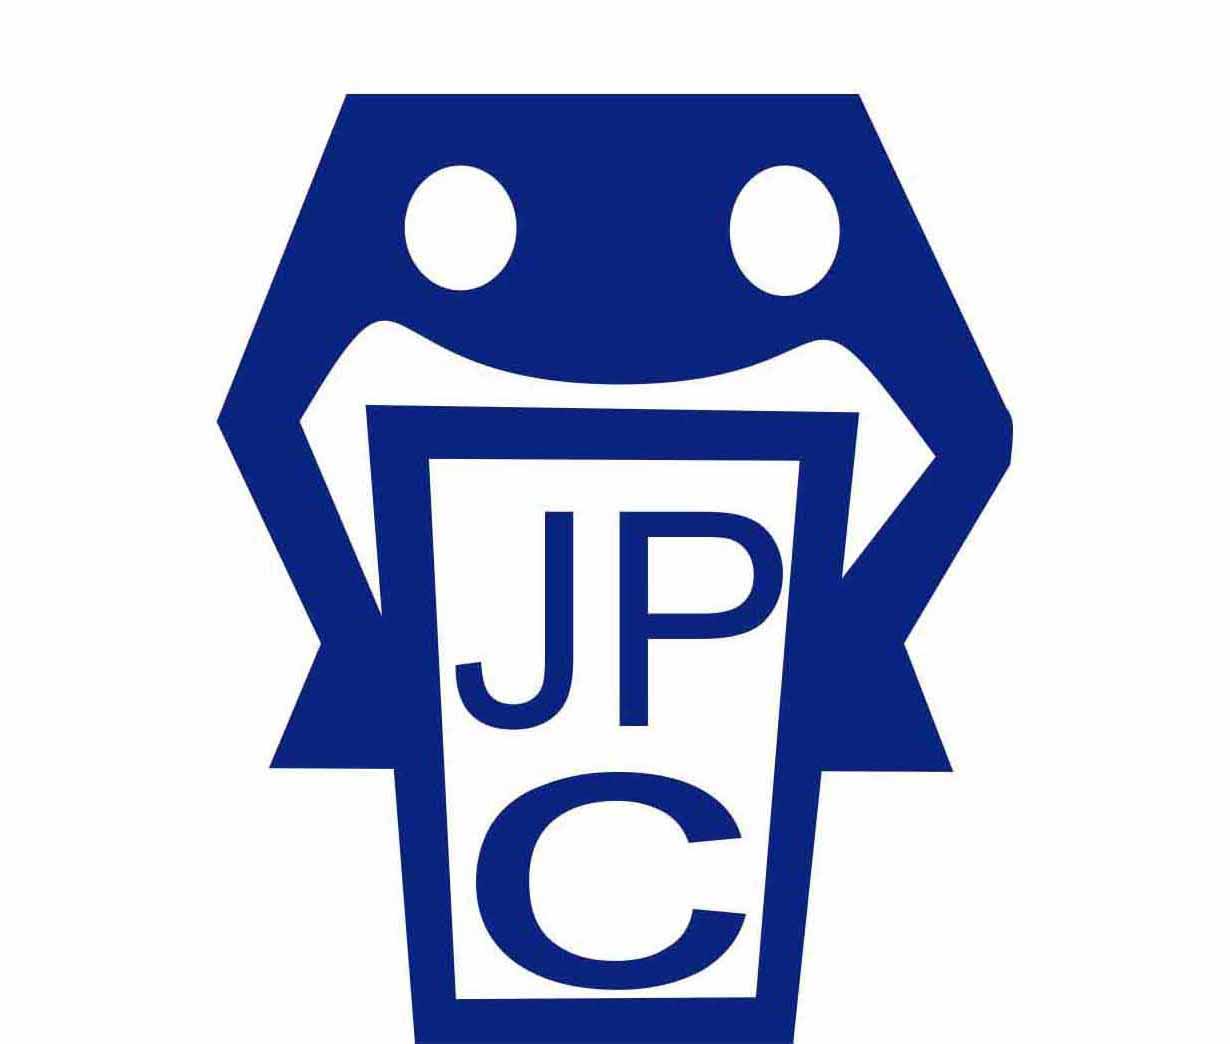  JOINT PLANT COMMITTEE LOGO